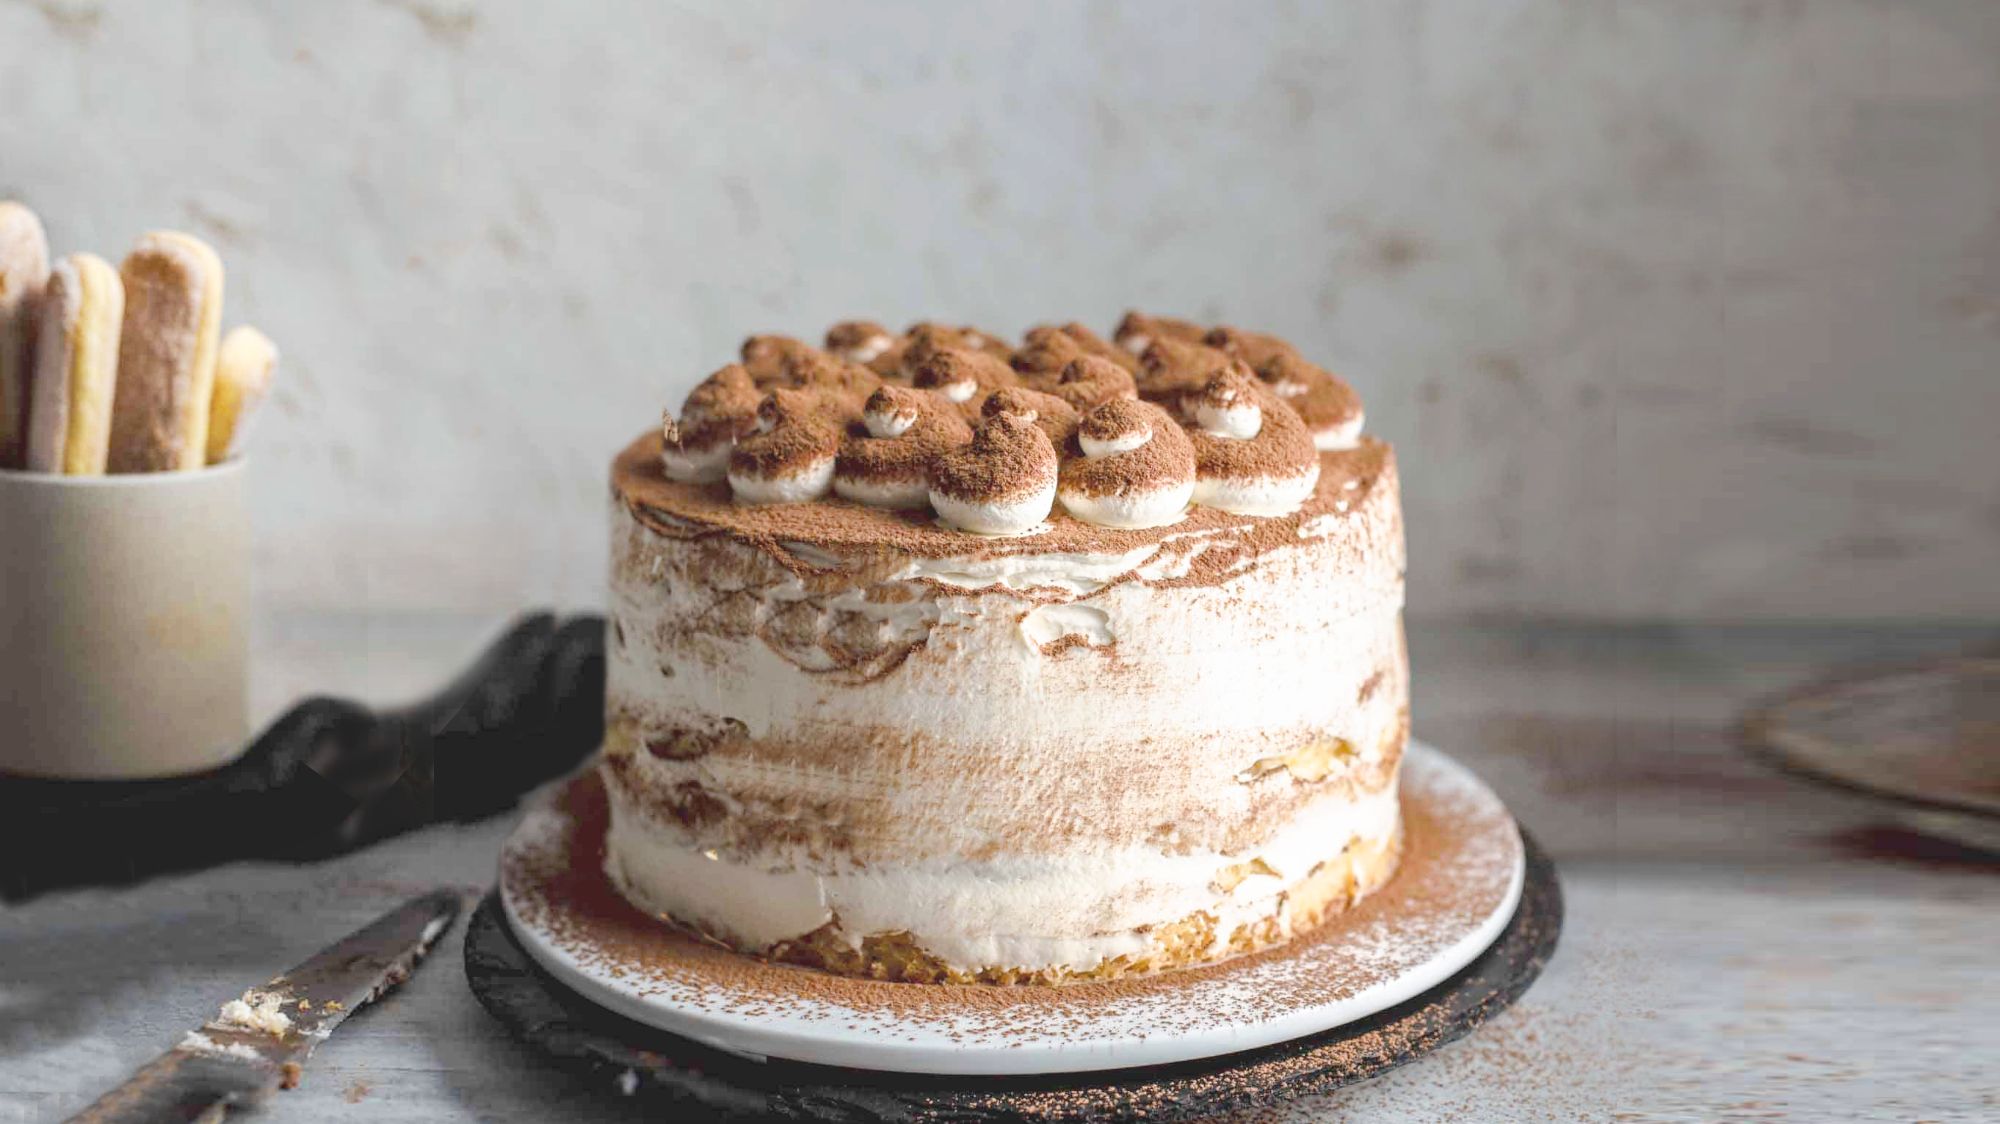 Tiramisu Cake with simple piped decorations and cocoa powder